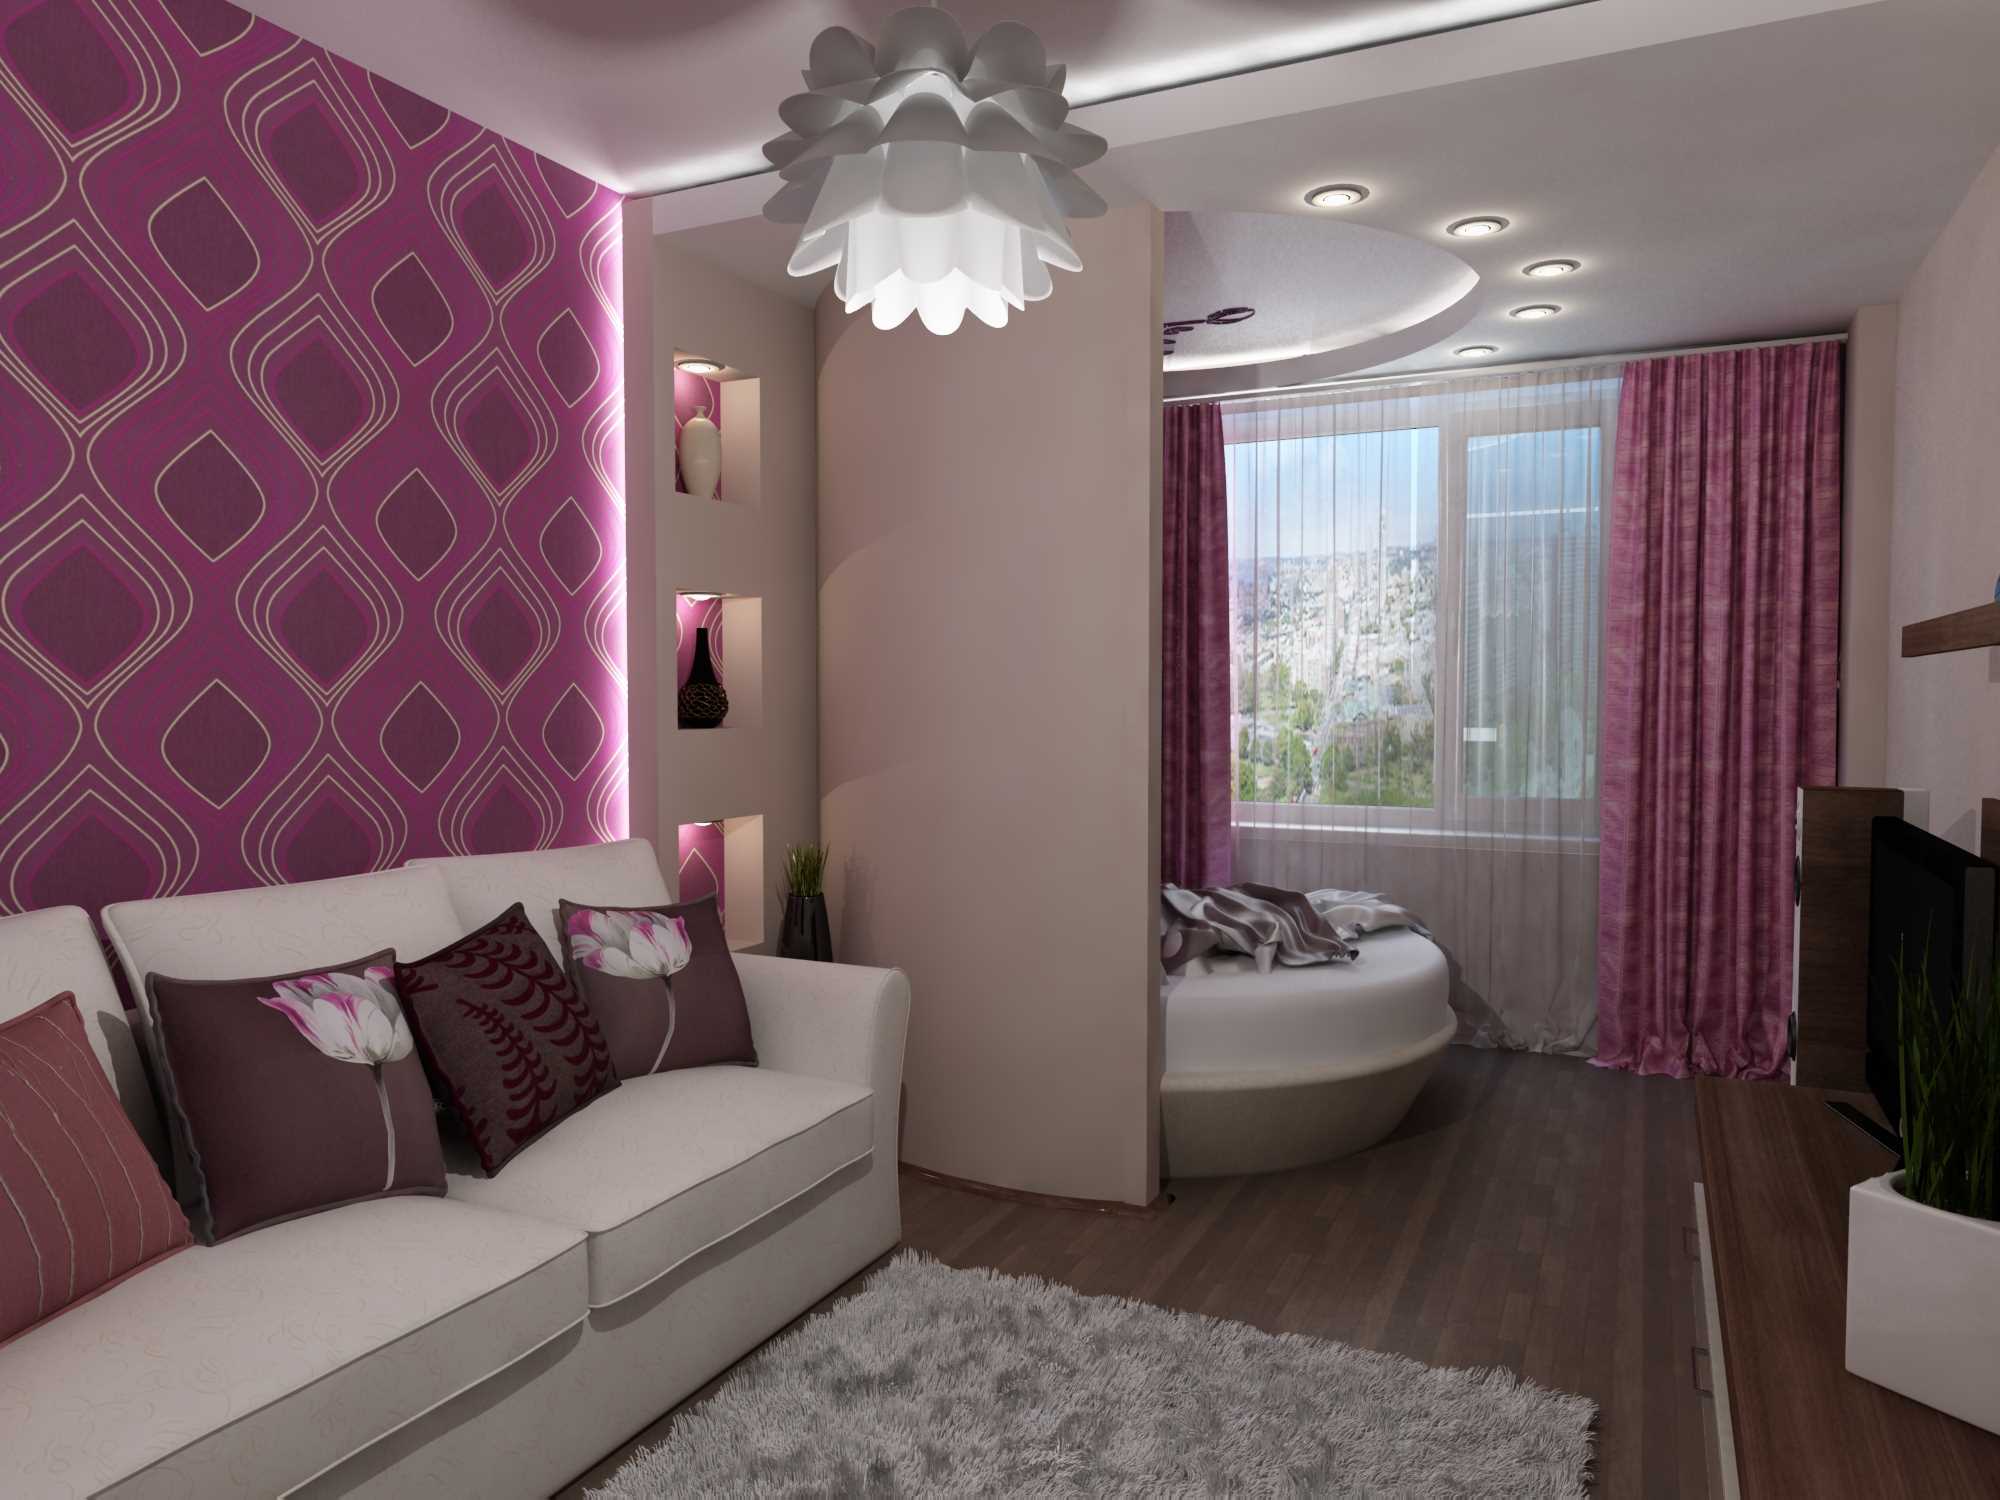 variant of the bright interior bedroom living room